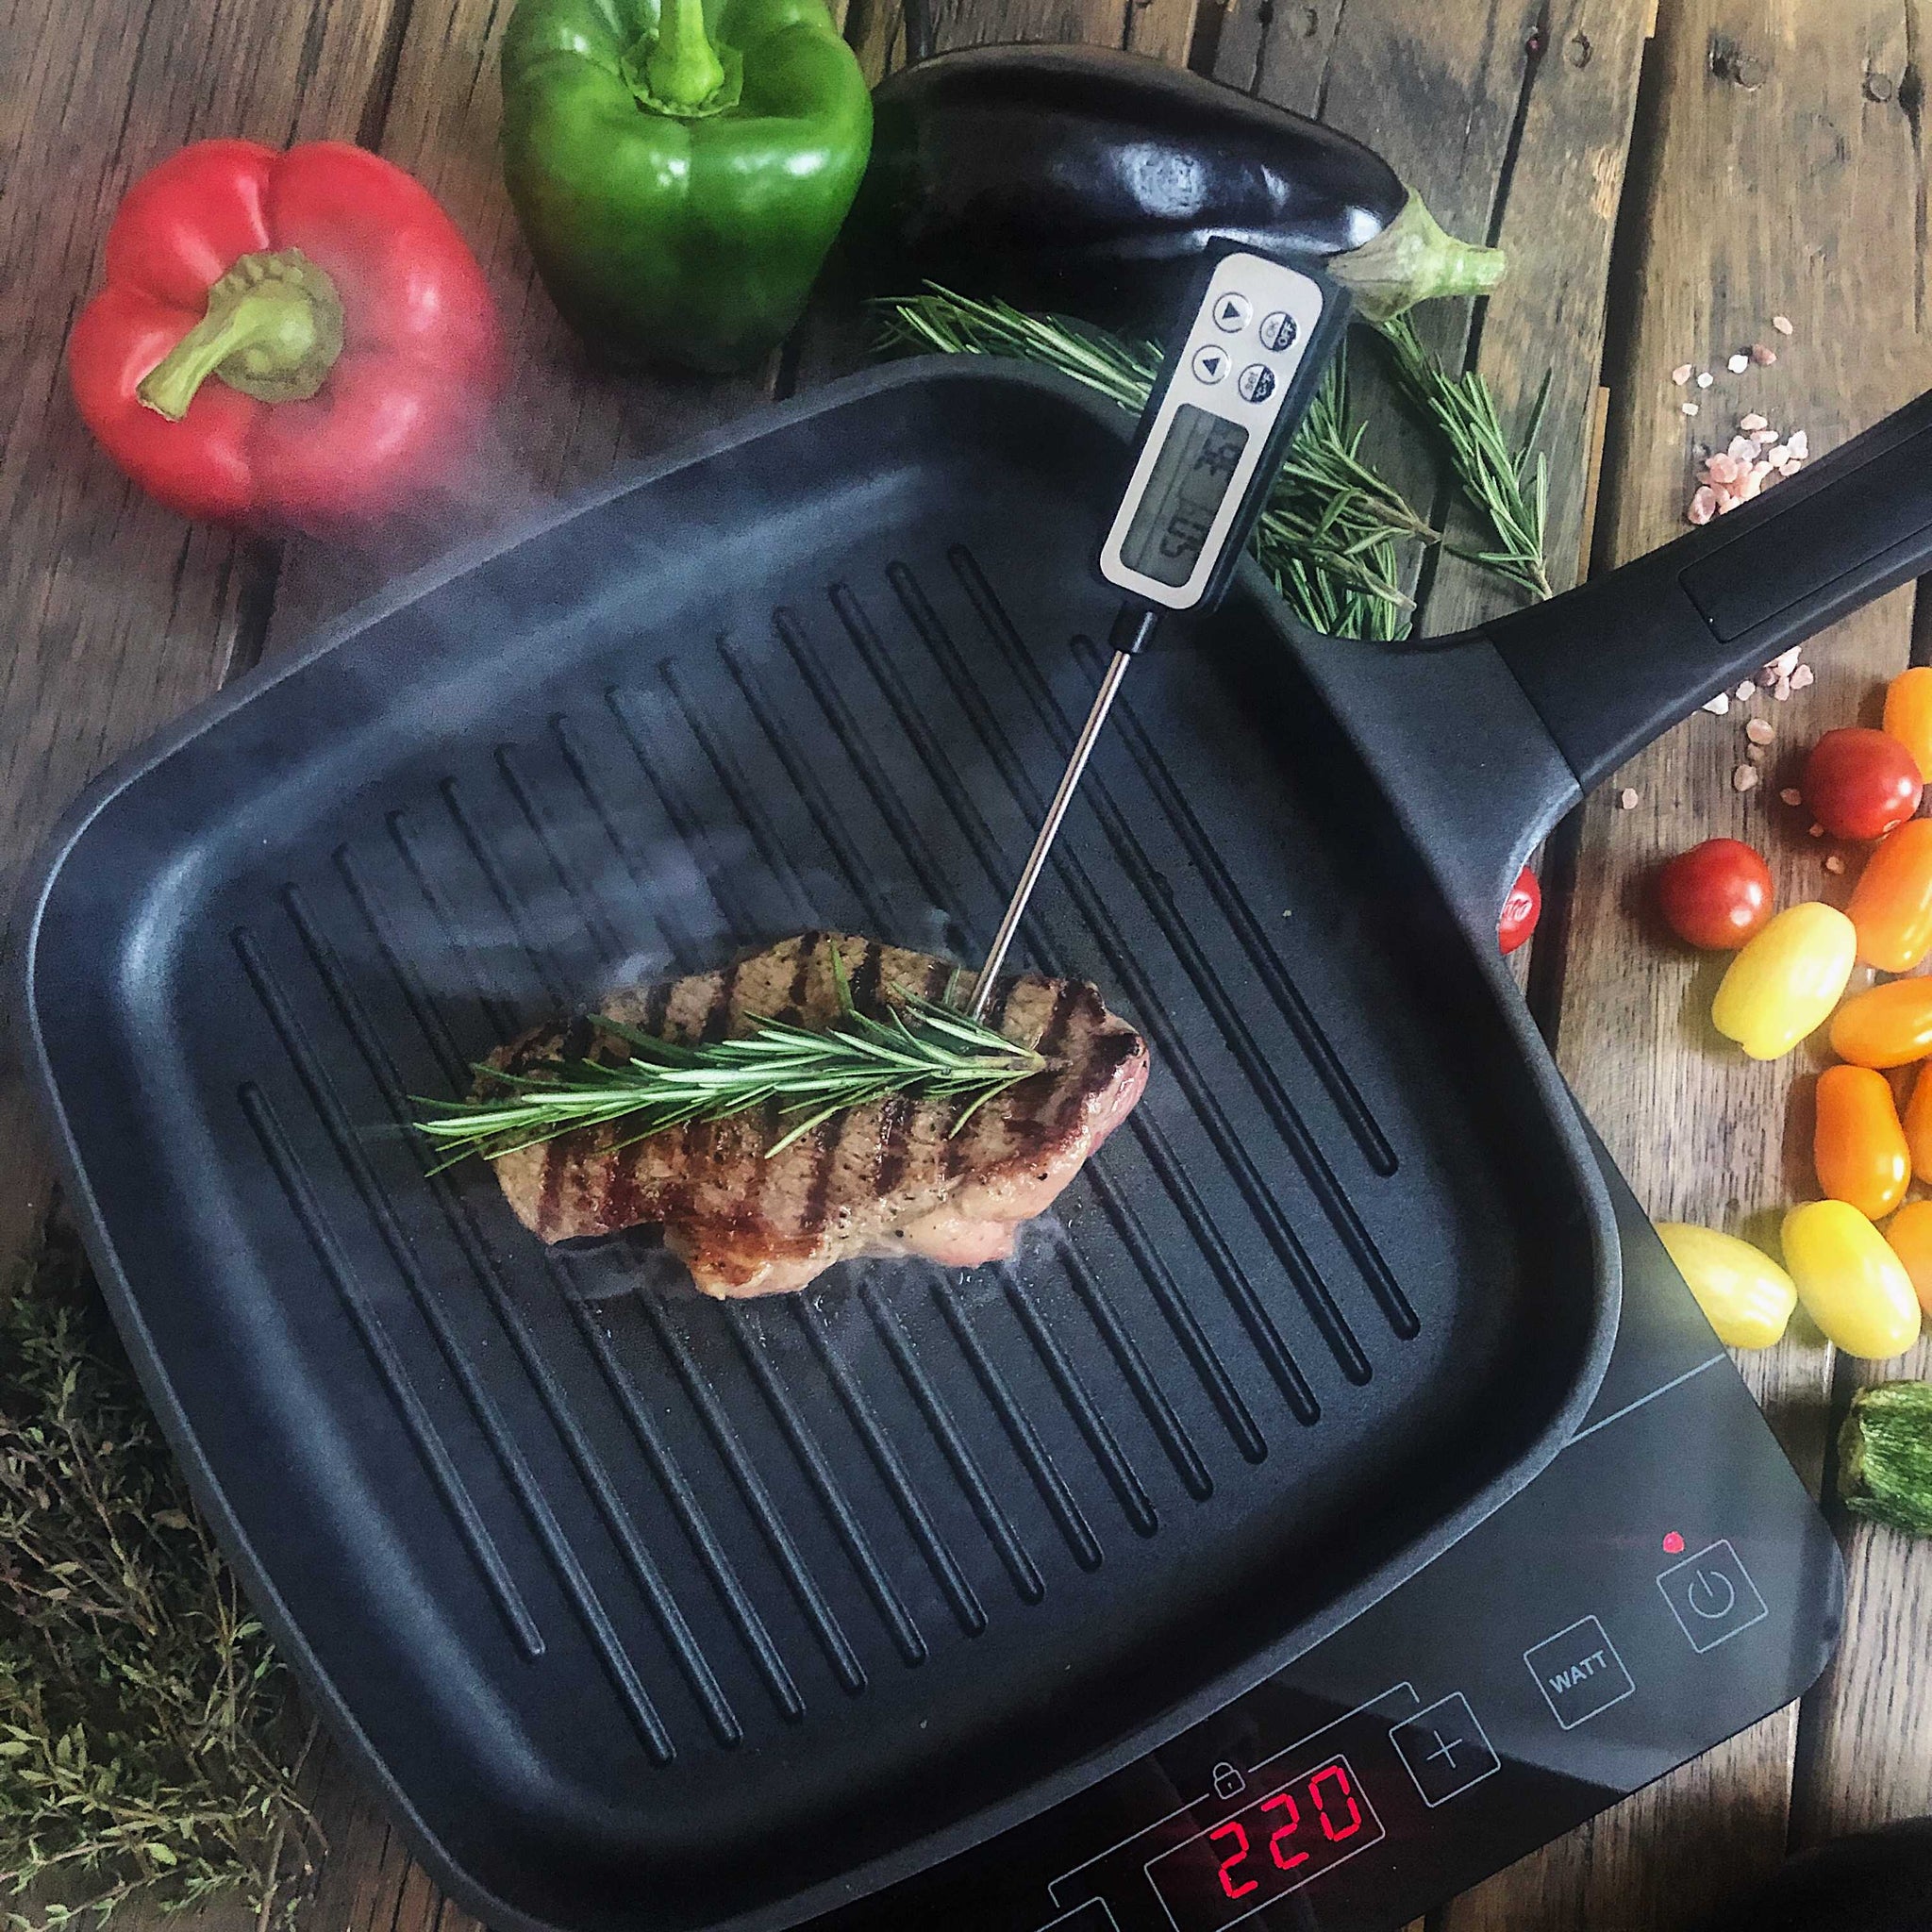 Jean-Patrique Griddle Me This - Cast Aluminium Griddle Plate with Stainless Steel Skewers